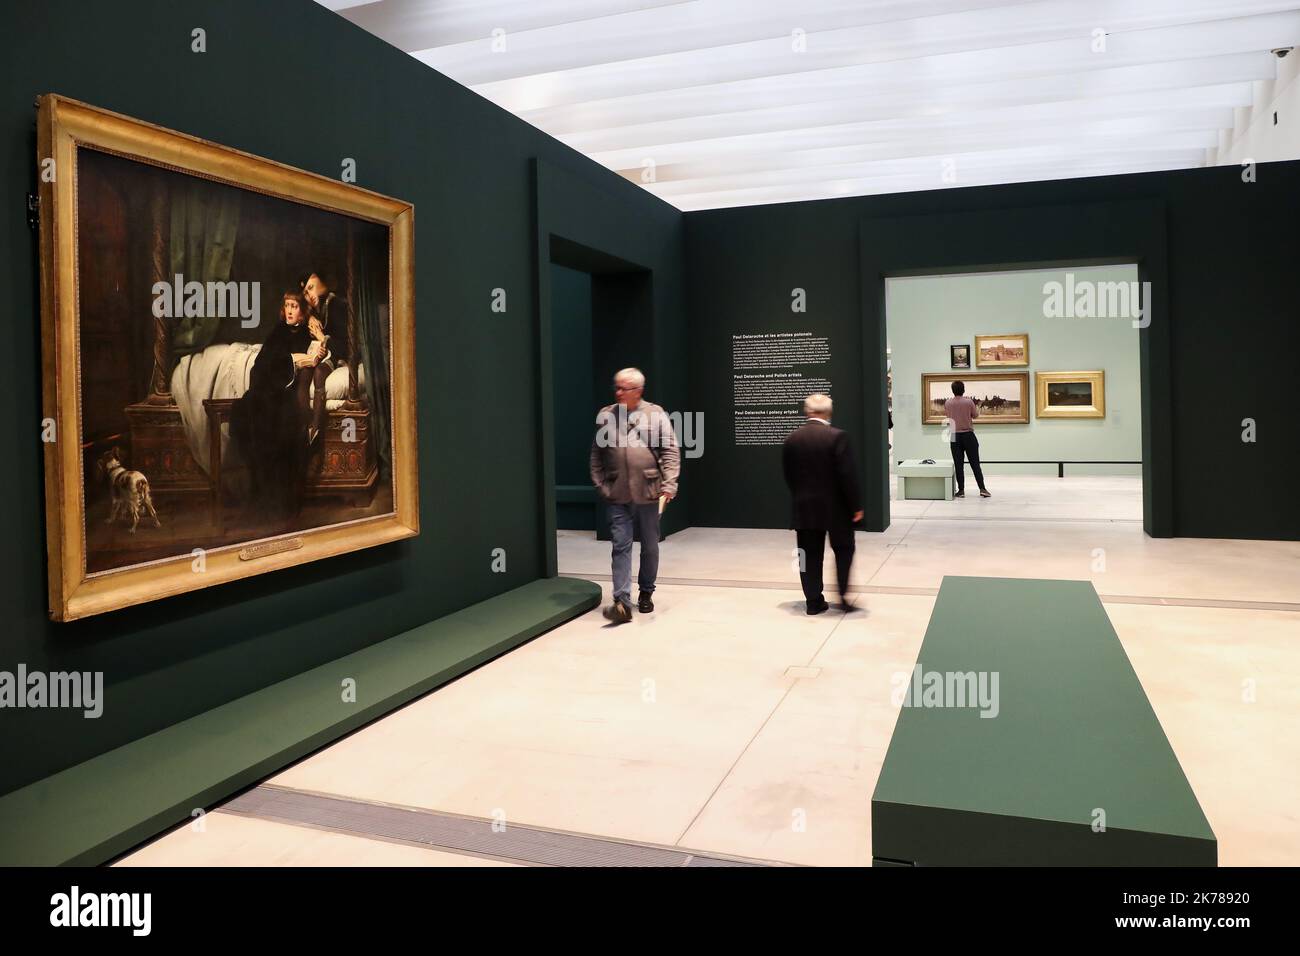 Lens, France, sept 24th 2019 - Louvre Lens Museum POLOGNE, 1840 - 1918 PAINTING THE SOUL OF A NATION The year 2019 marks the centenary of the signing, on 3 September 1919, of the agreement between France and Poland “concerning emigration and immigration”. It led to the arrival of large numbers of Polish workers in France, notably in the mining region in the north of the country.  Stock Photo